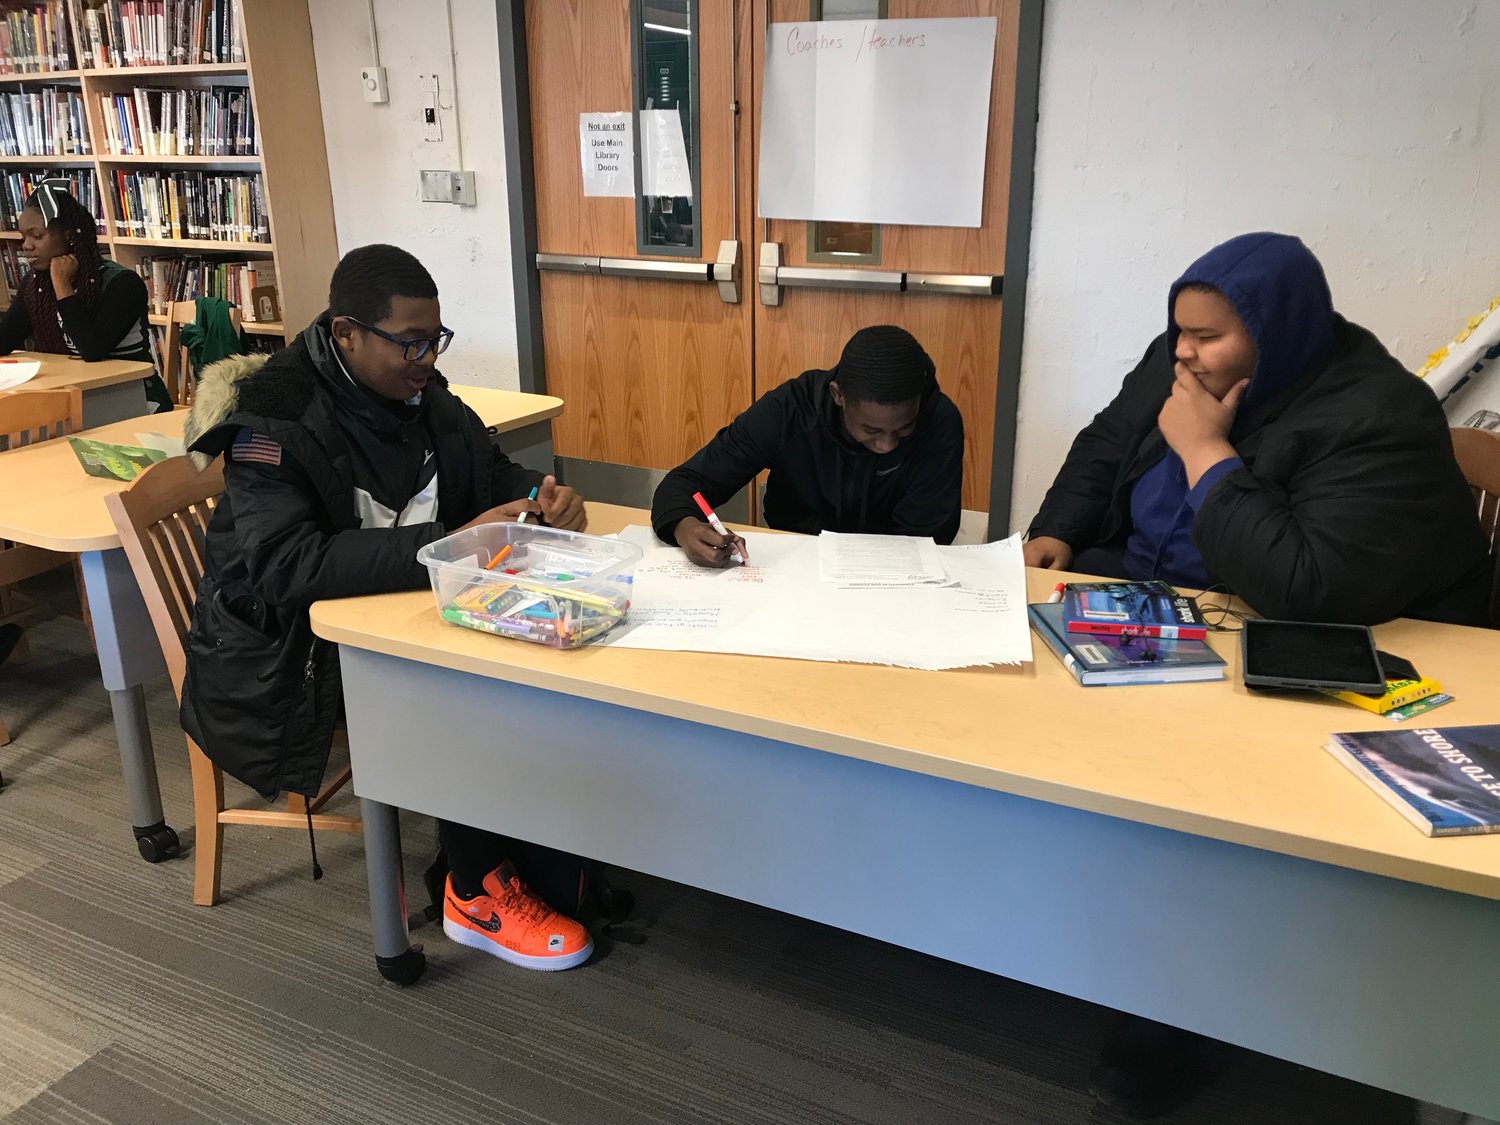 Over 100 students from English classes at Elmont Memorial High School have shared their stories through the school library-run project since the 2016-2017 school year.